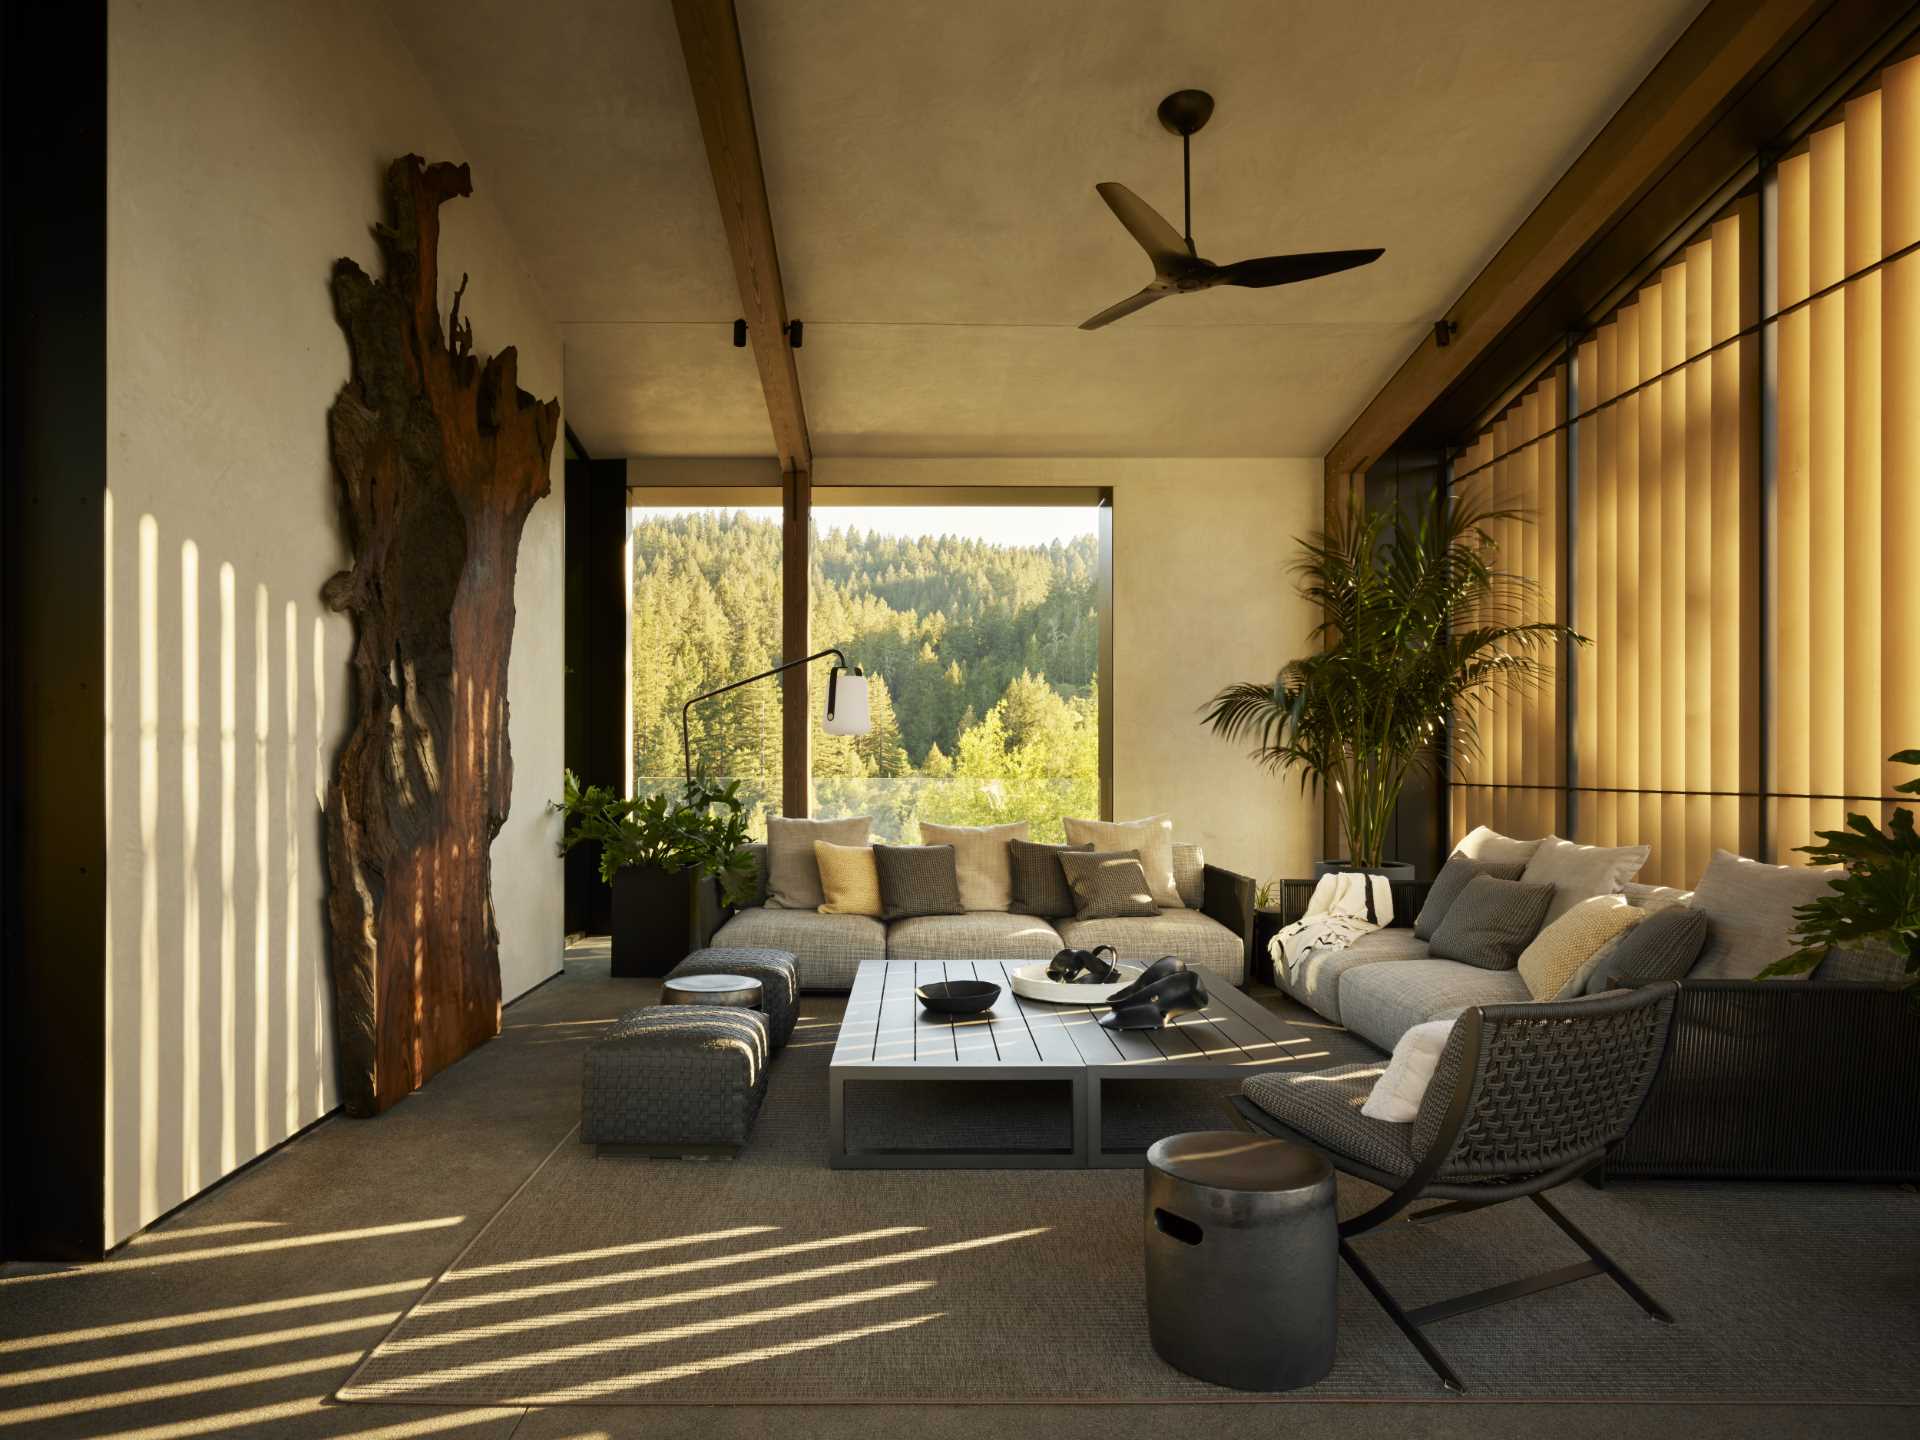 A modern home with a pitched ceiling, exposed wood beams, and expansive outdoor living spaces.